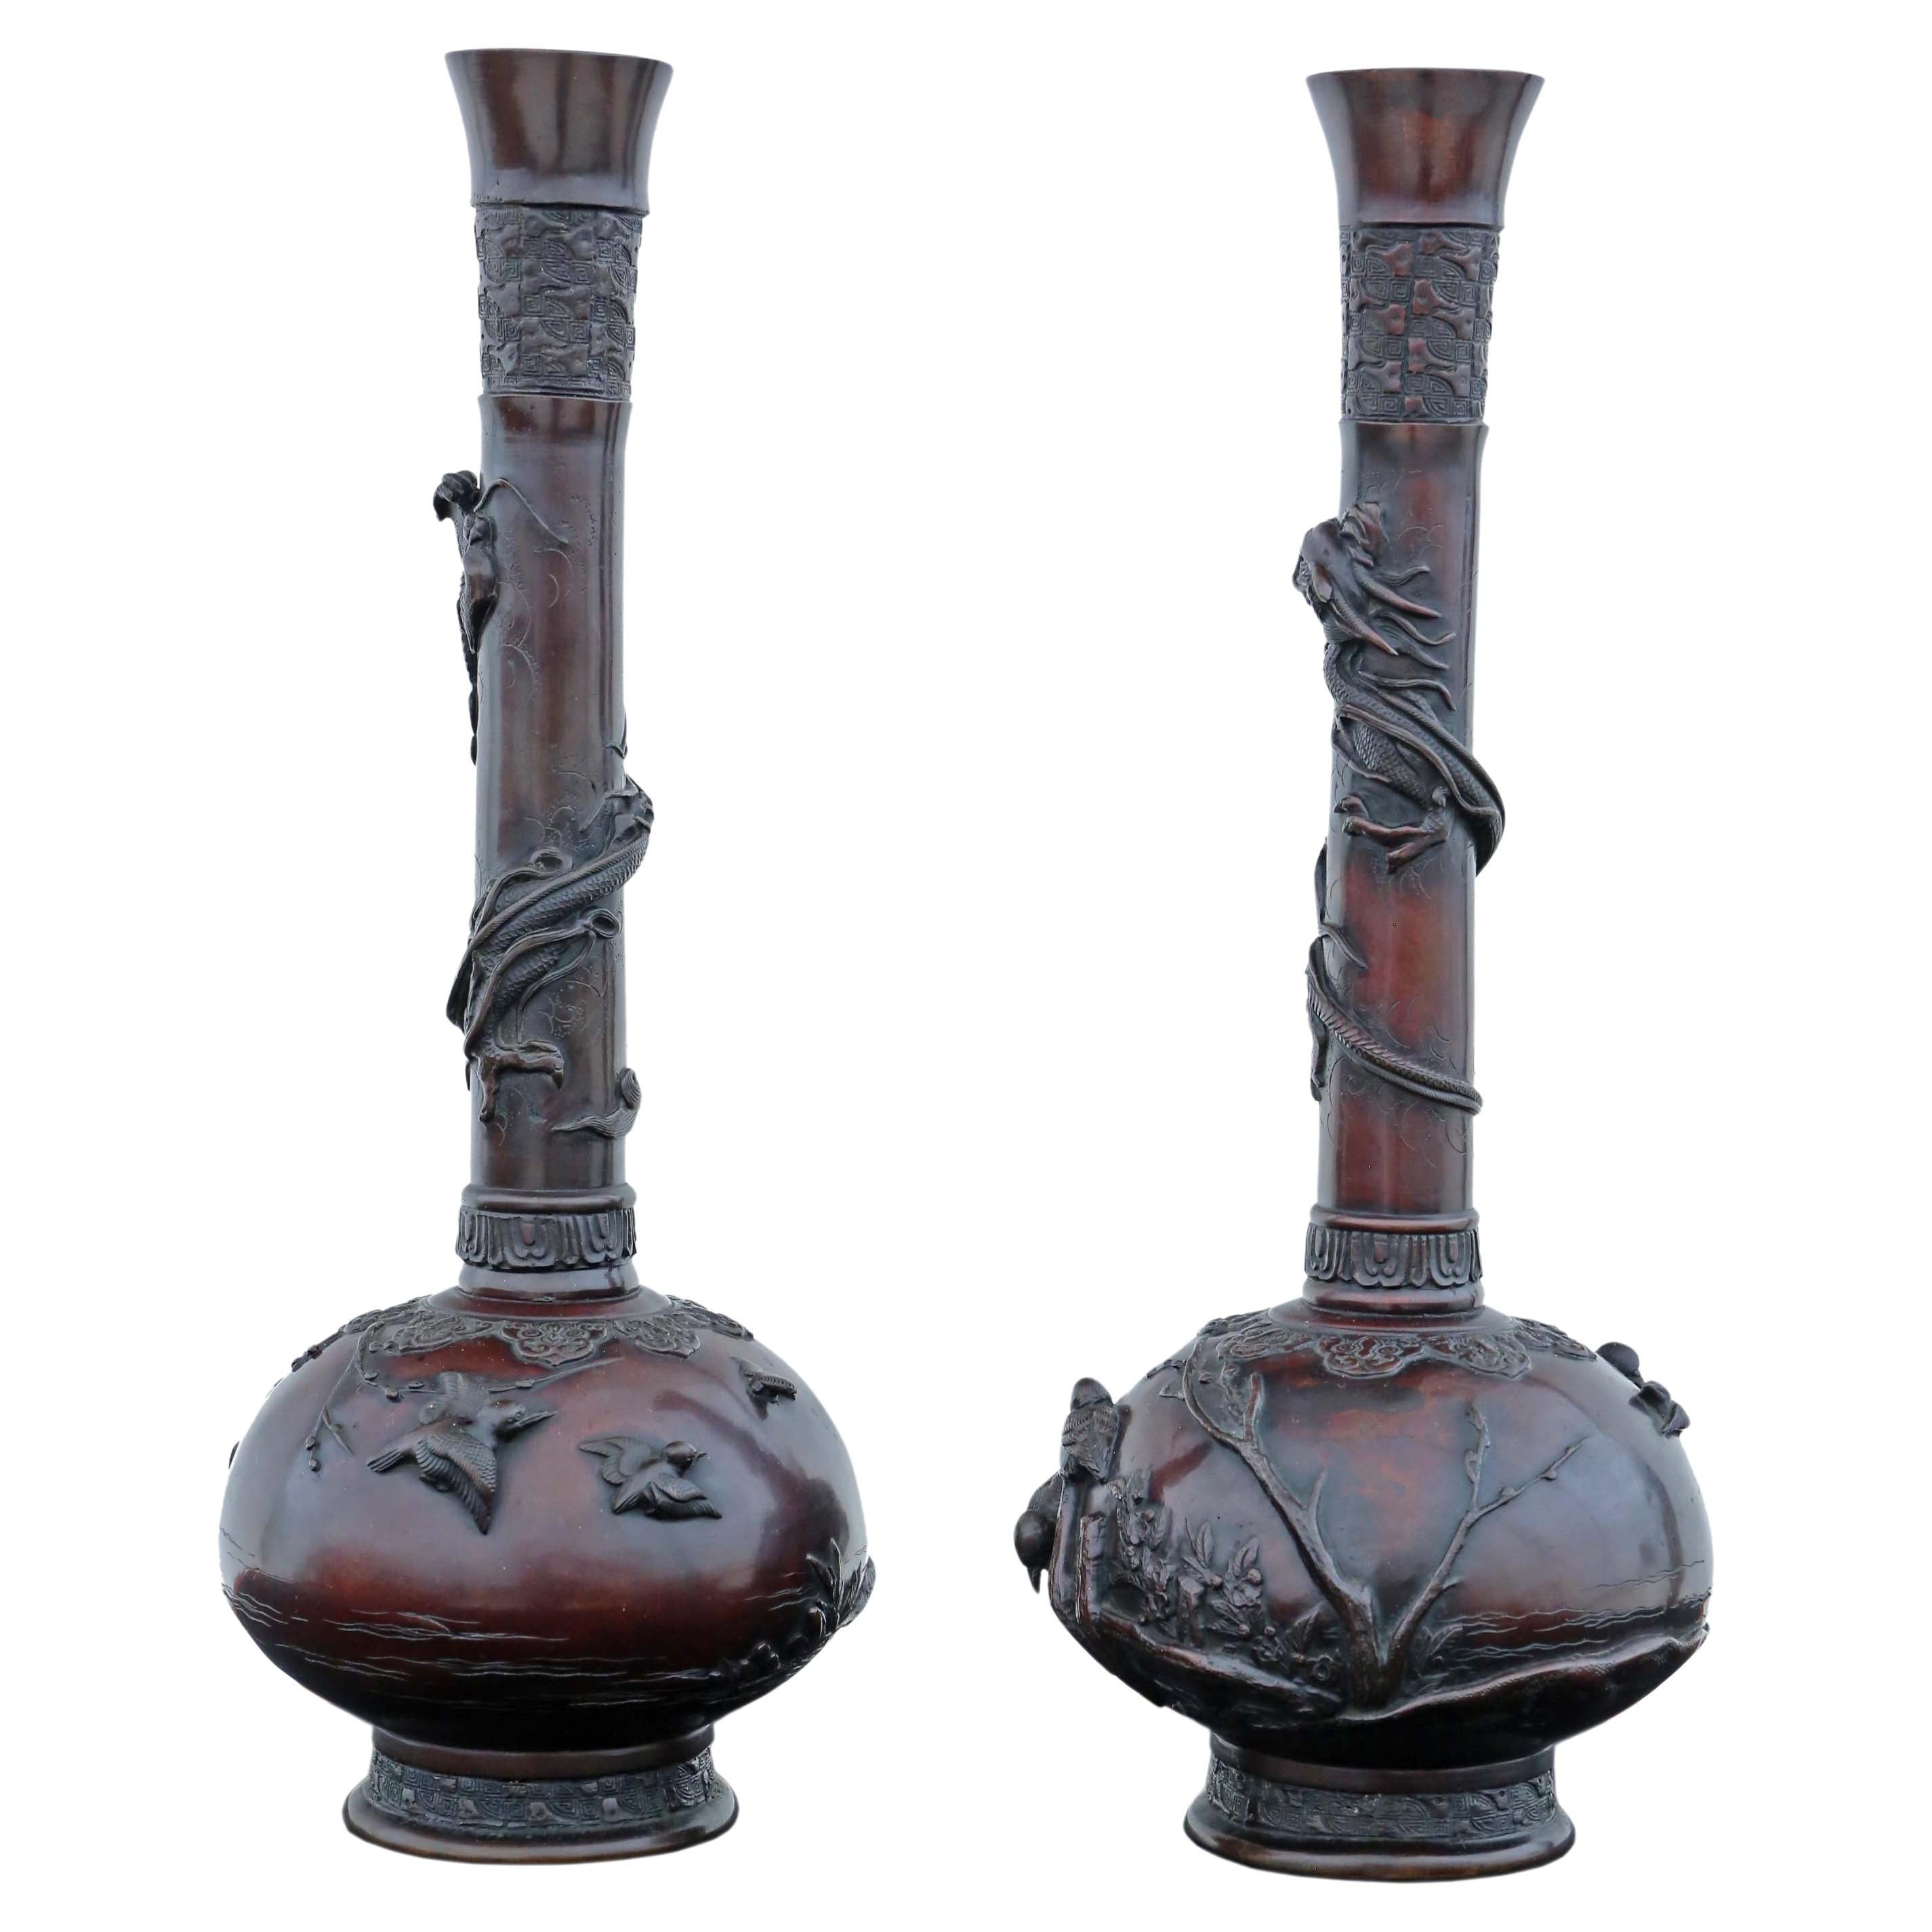 Very Large Pair of Fine Quality Japanese Bronze Vases 19th Century Meiji Period